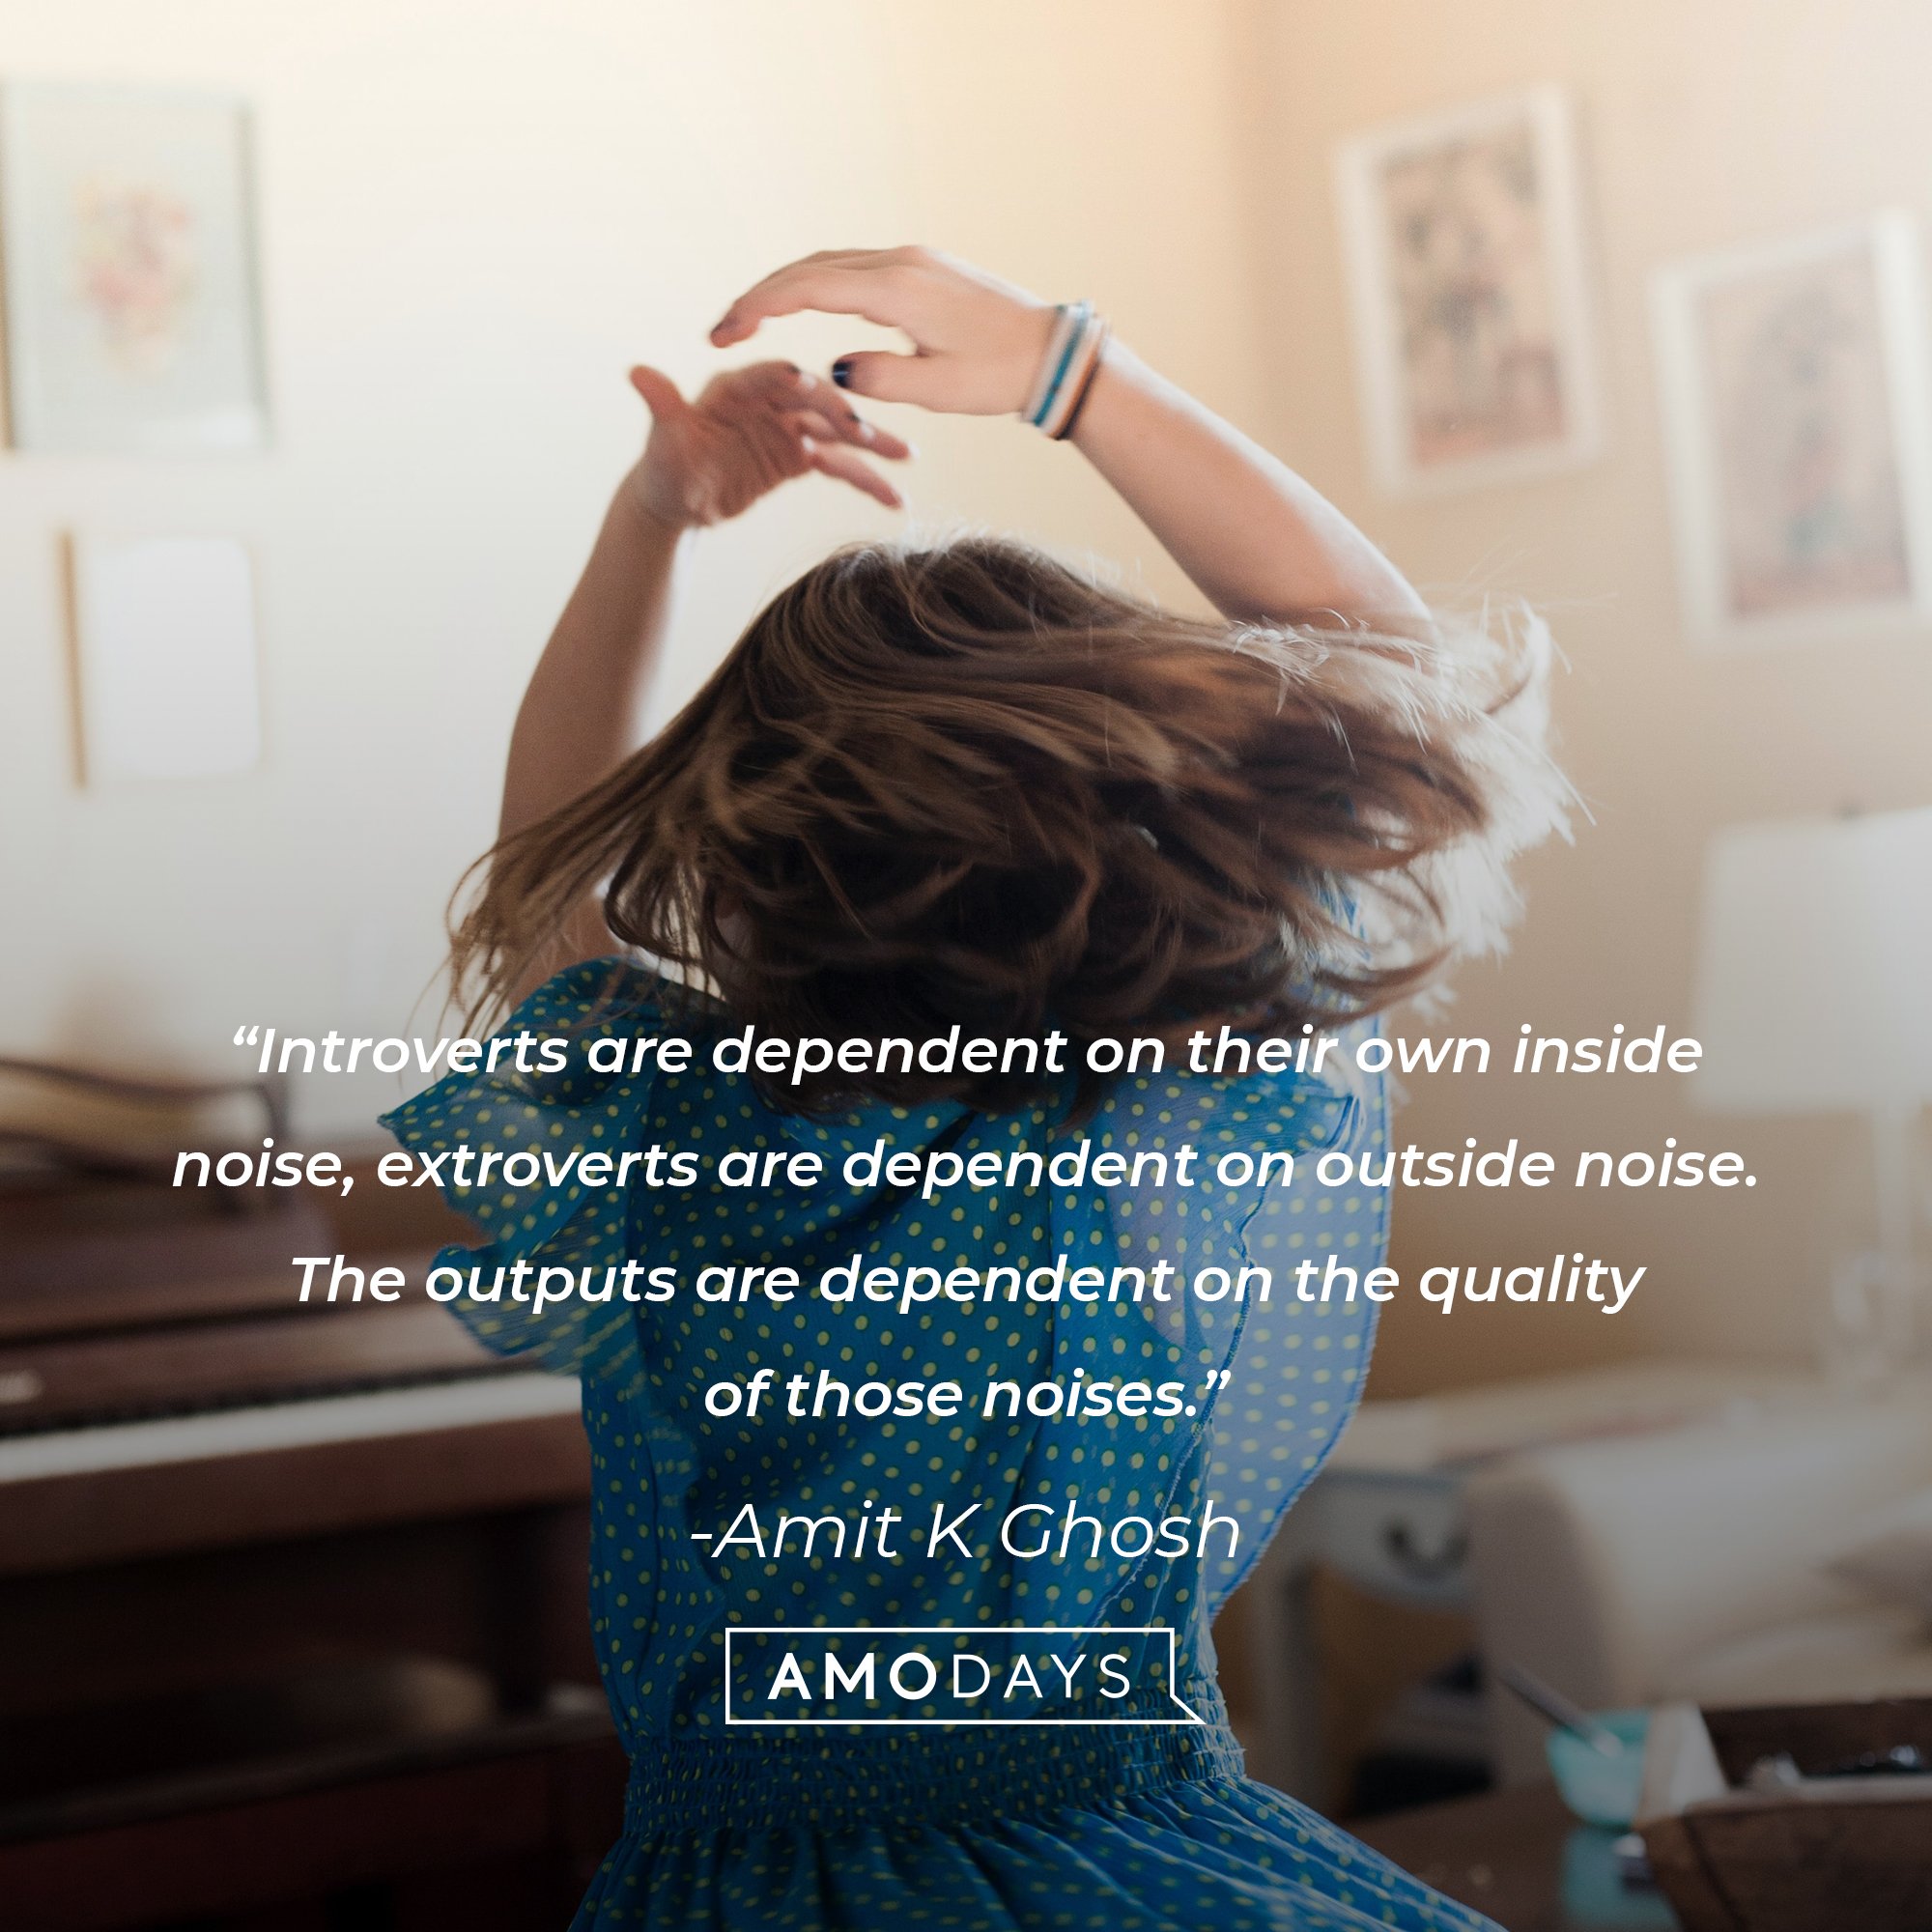  Amit K Ghosh's quote: “Introverts are dependent on their own inside noise, extroverts are dependent on outside noise. The outputs are dependent on the quality of those noises.”| Image: AmoDays